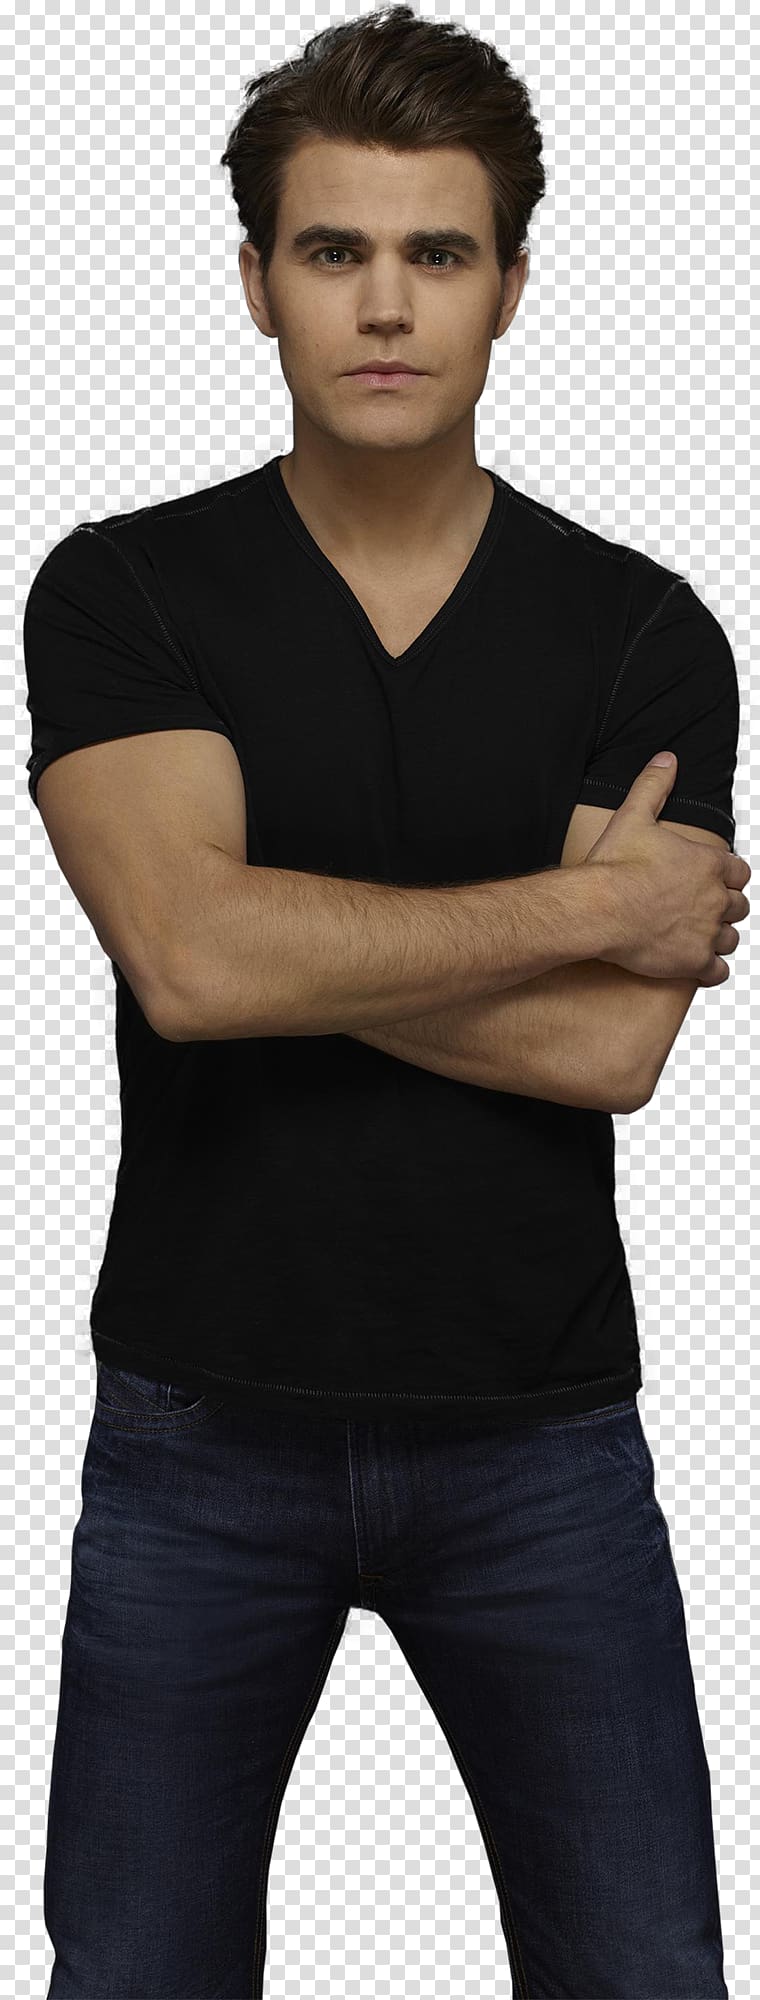 Paul Wesley Stefan Salvatore The Vampire Diaries, Season 6 The Vampire Diaries, Season 1, Vampire transparent background PNG clipart